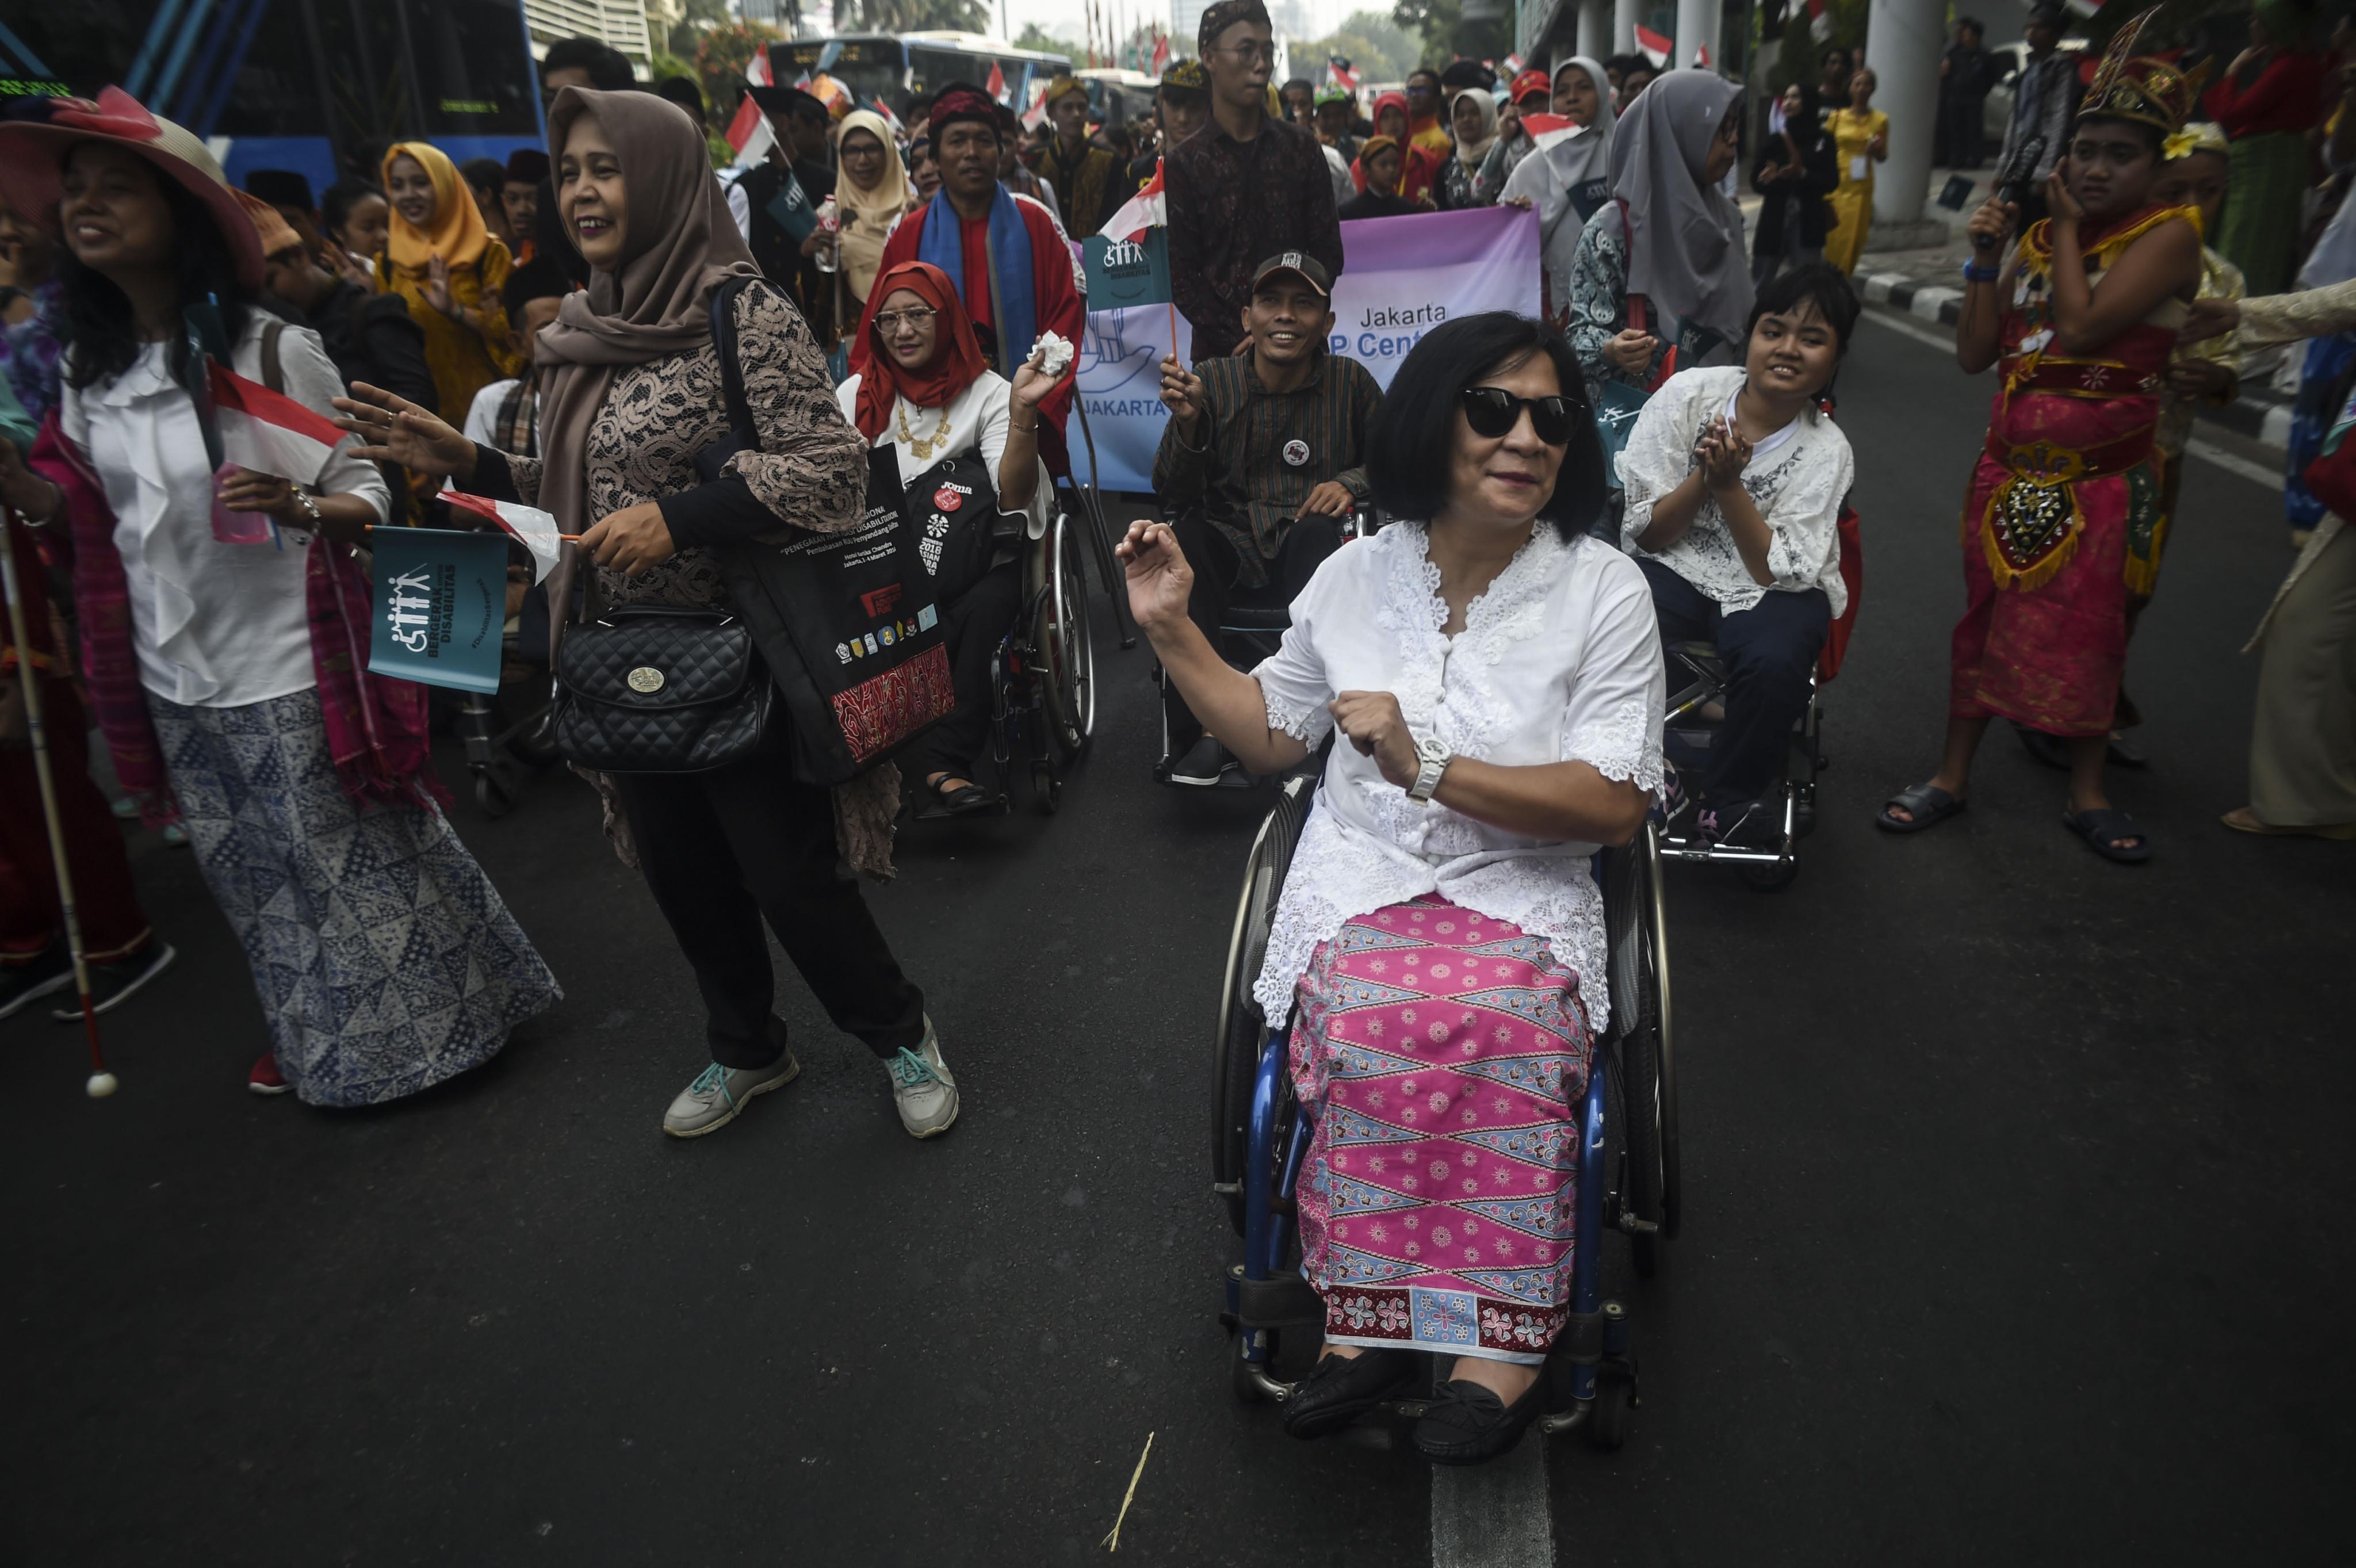 People with disabilities take part in a rally in Jakarta, Indonesia, in 2019.